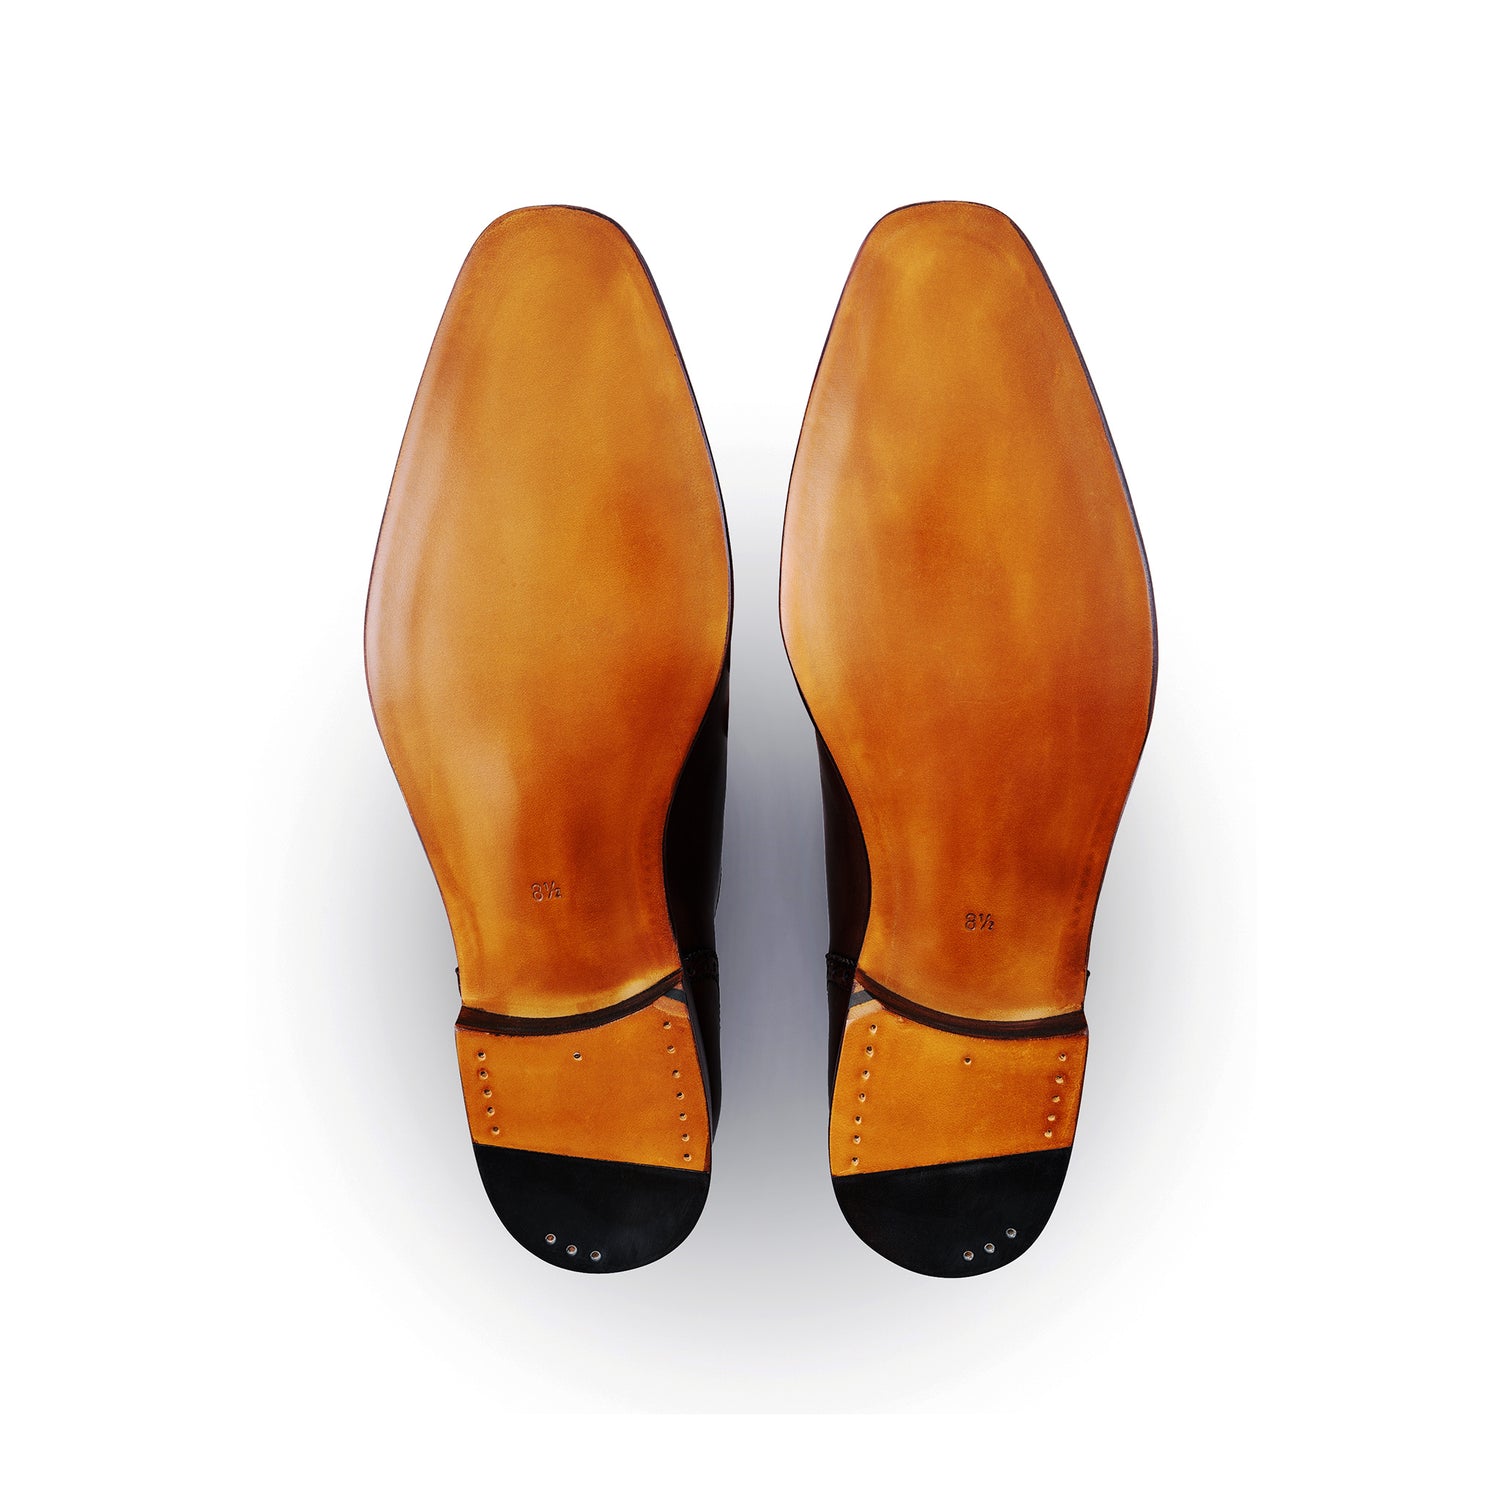 TLB Mallorca leather shoes 517 / OLIVER / VEGANO BROWN